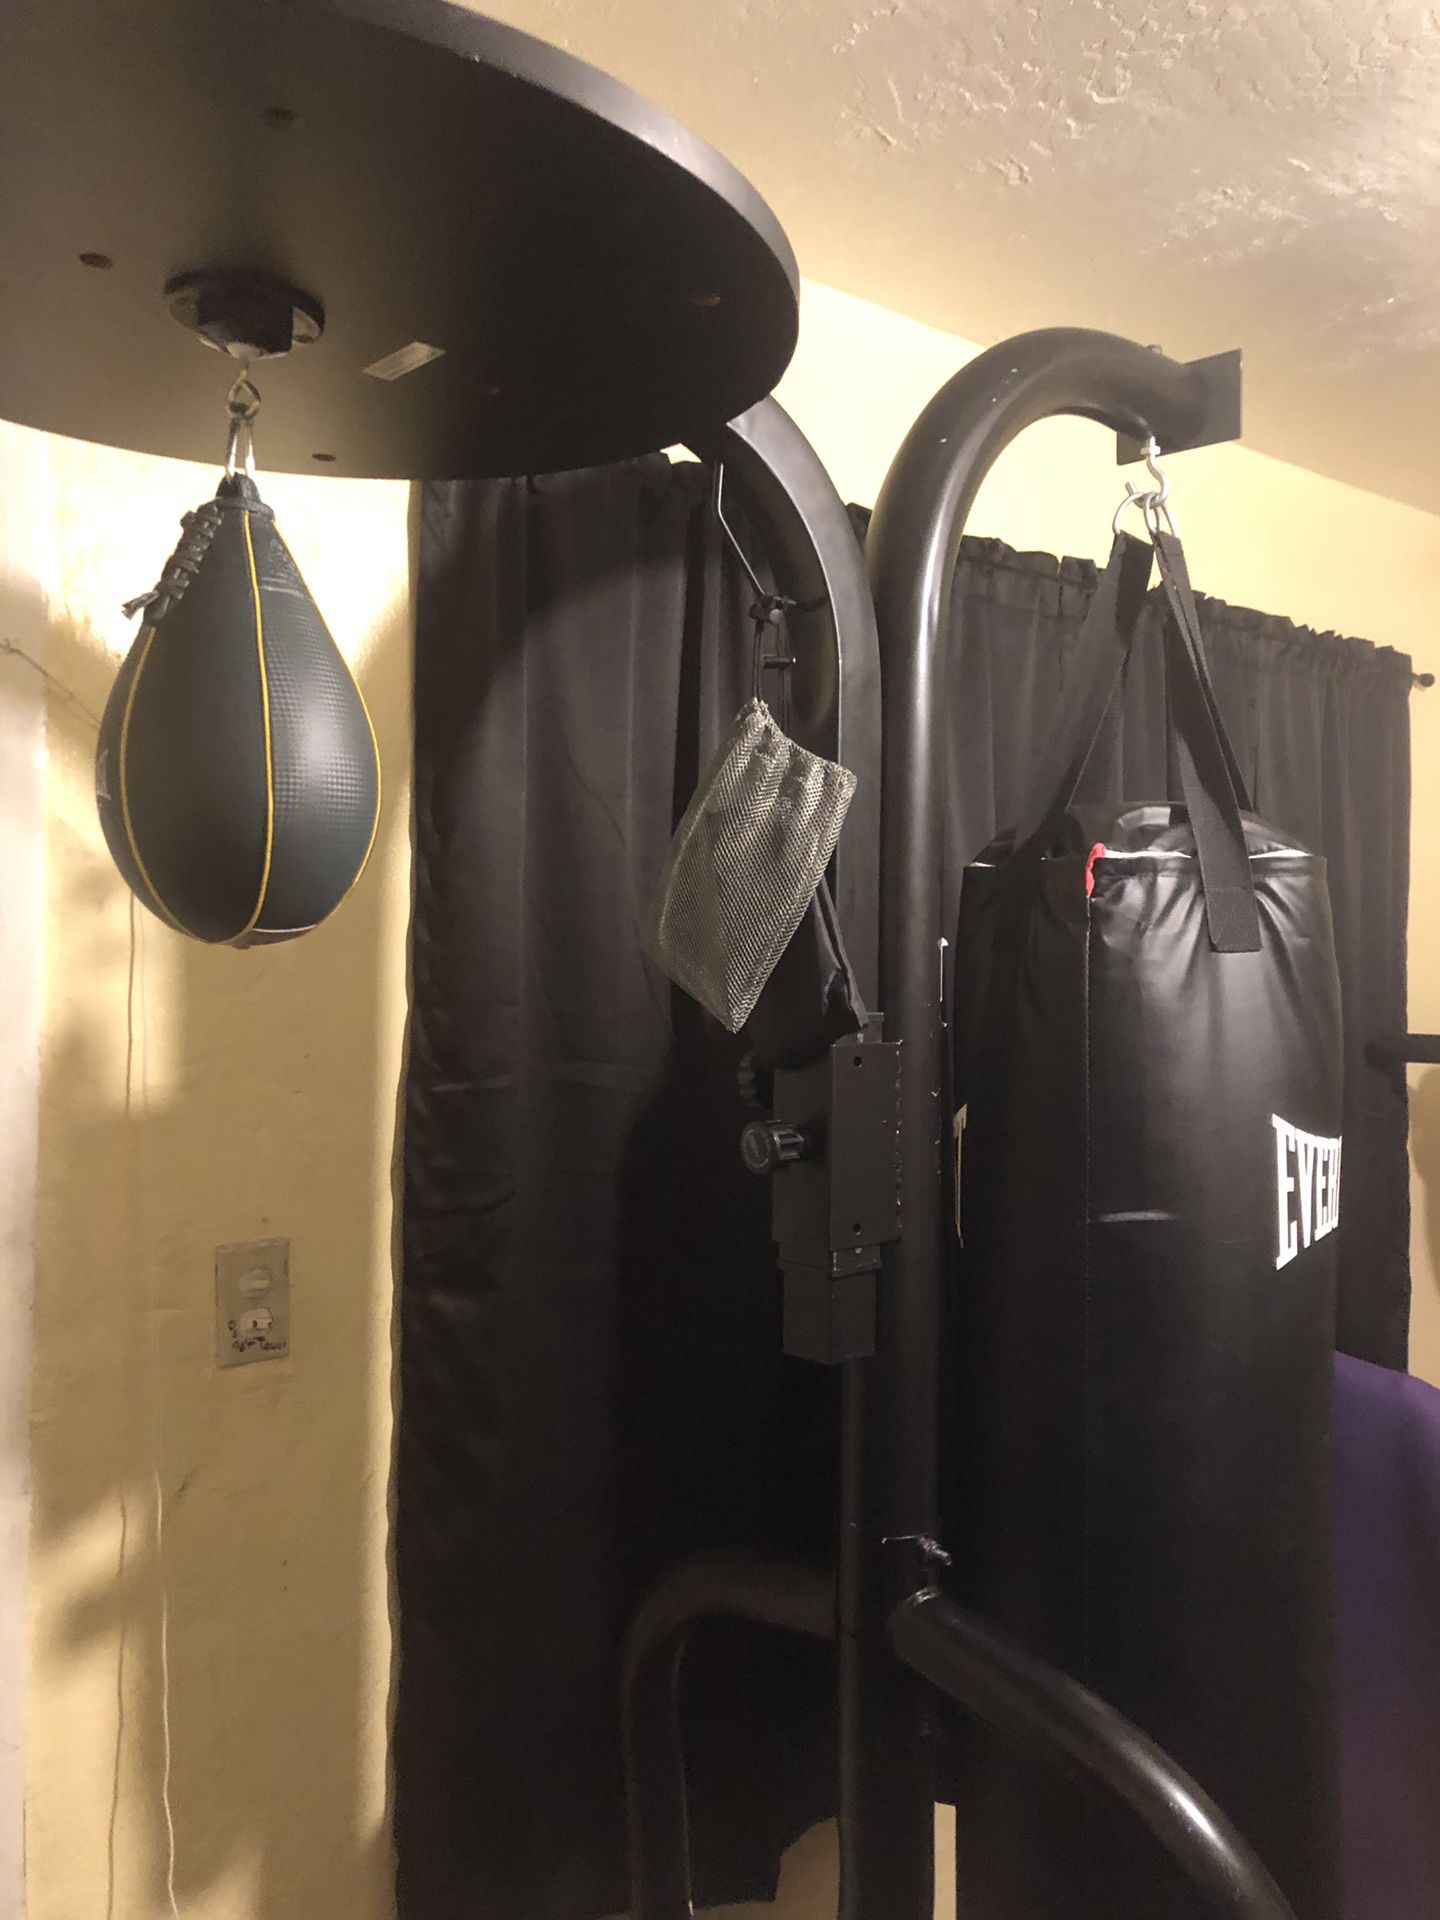 Punching Bag Needs a New Home